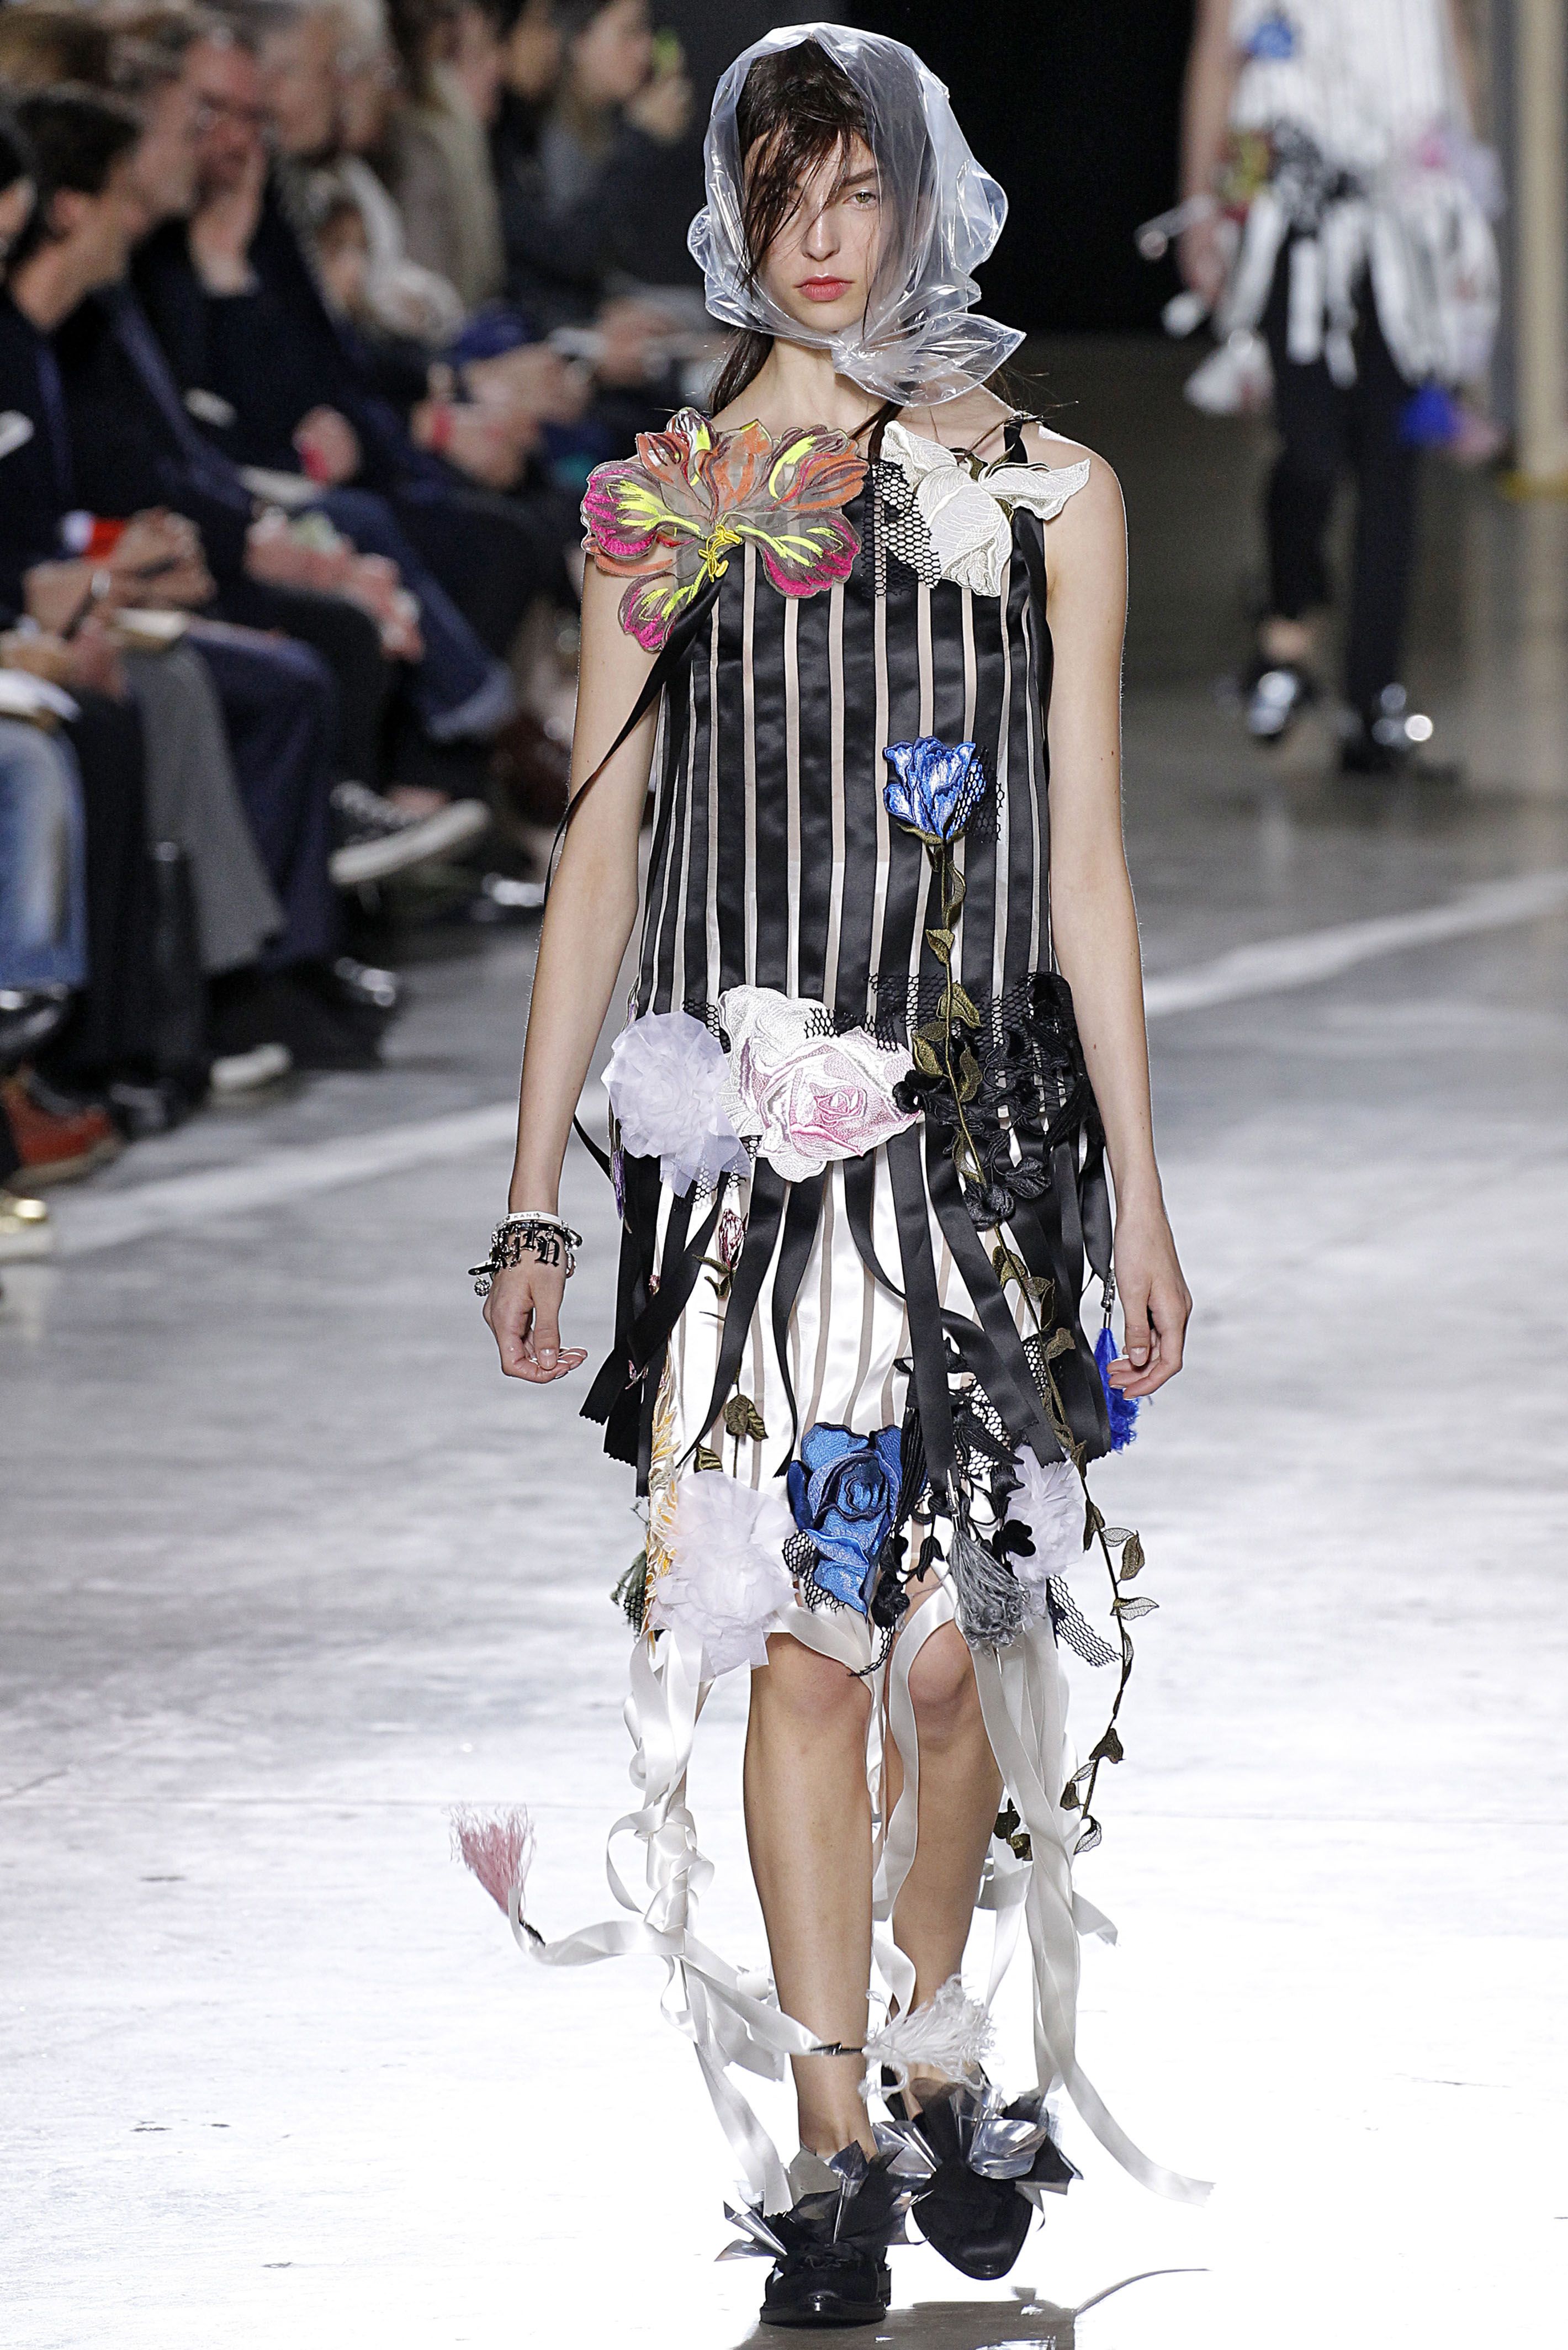 Fashion's obsession with trash